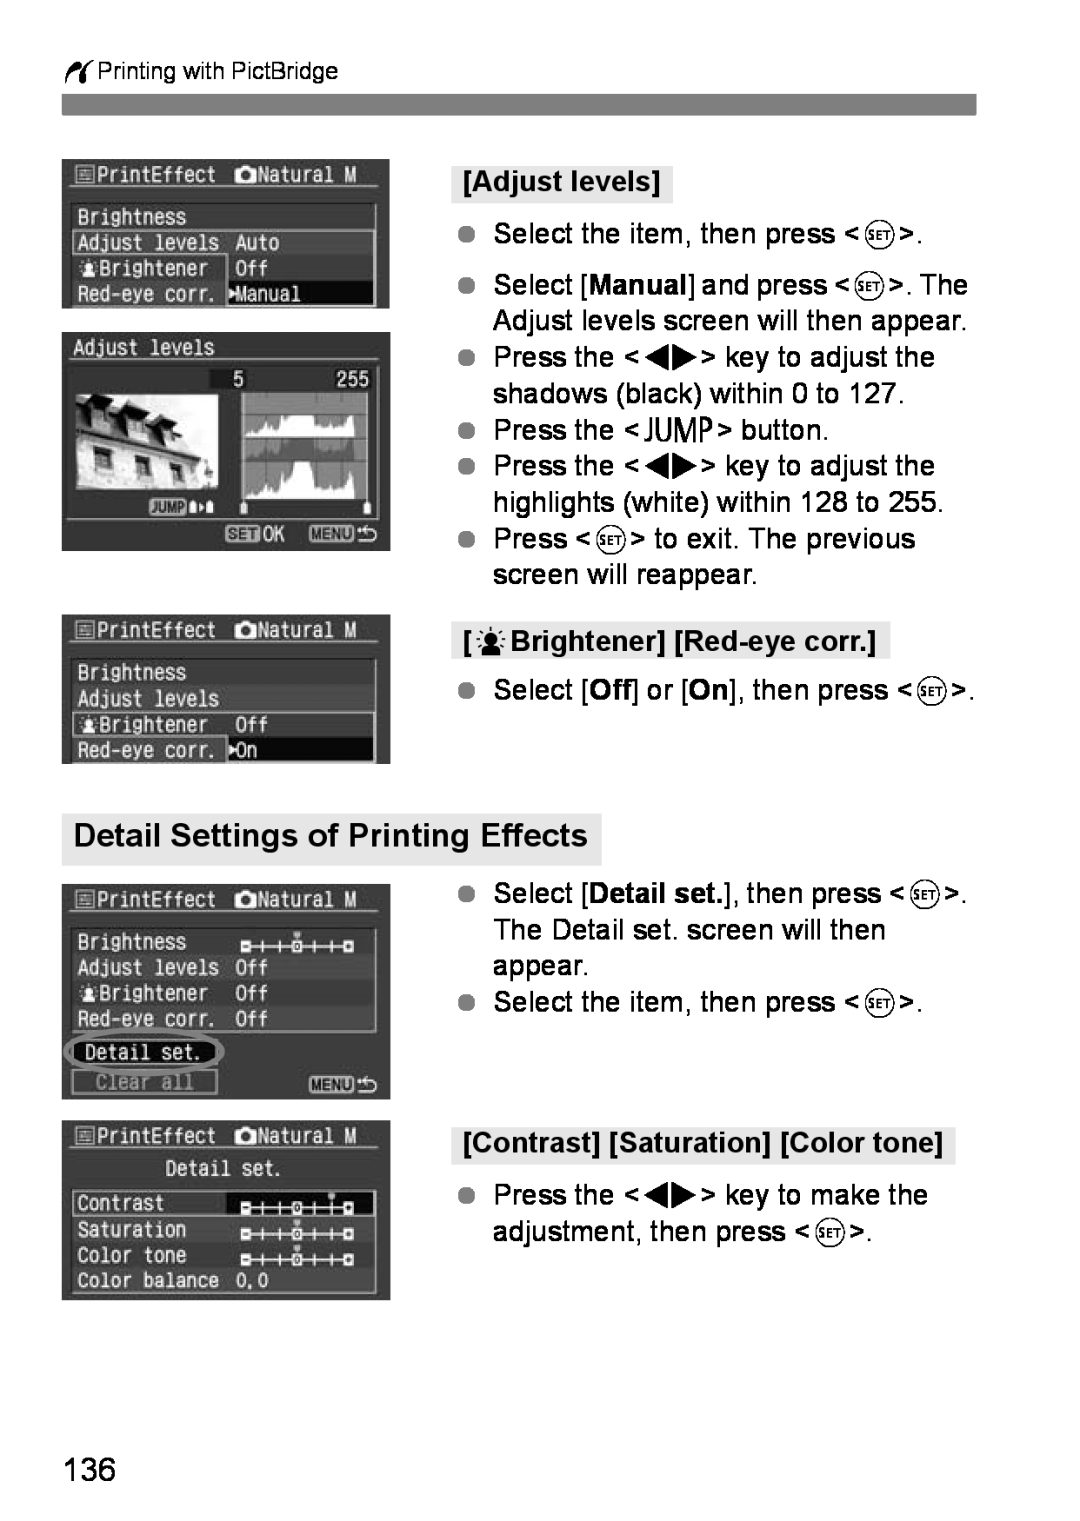 Canon EOS DIGITAL REBEL XTI instruction manual Detail Settings of Printing Effects, Adjust levels, kBrightener Red-eye corr 